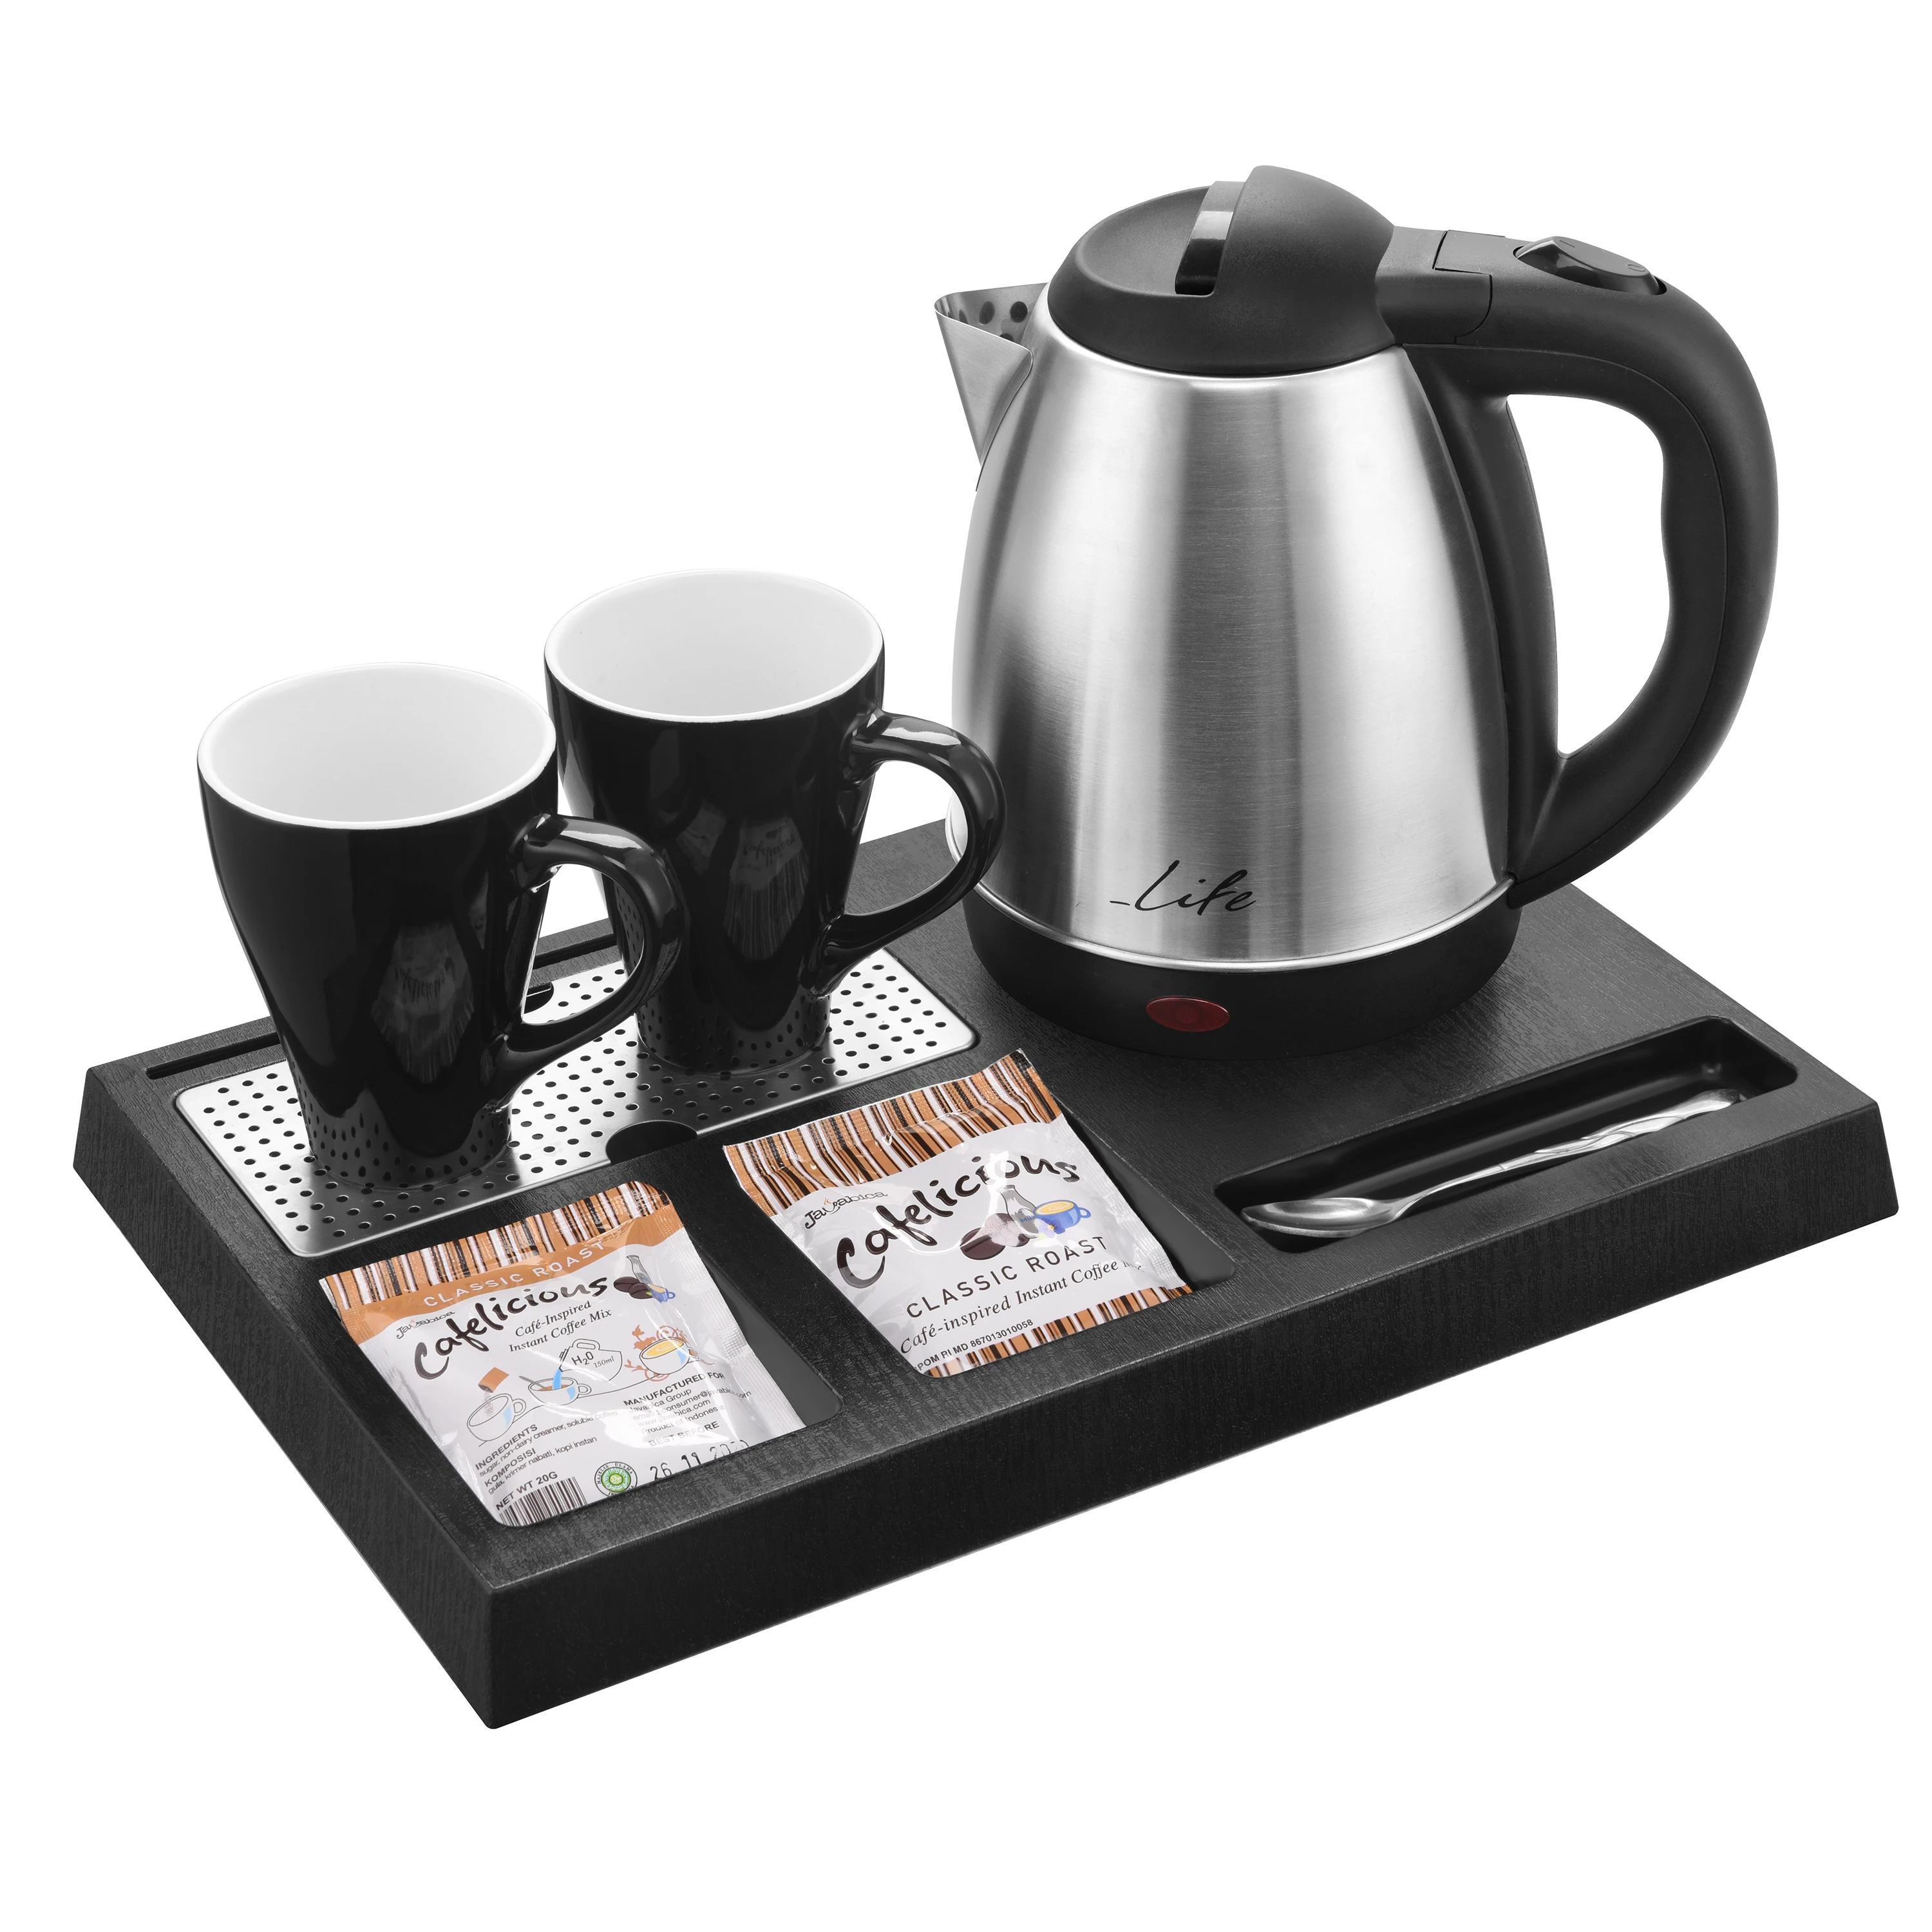 Hotel Tray Sets and Electric Kettle for Boiling Water - China